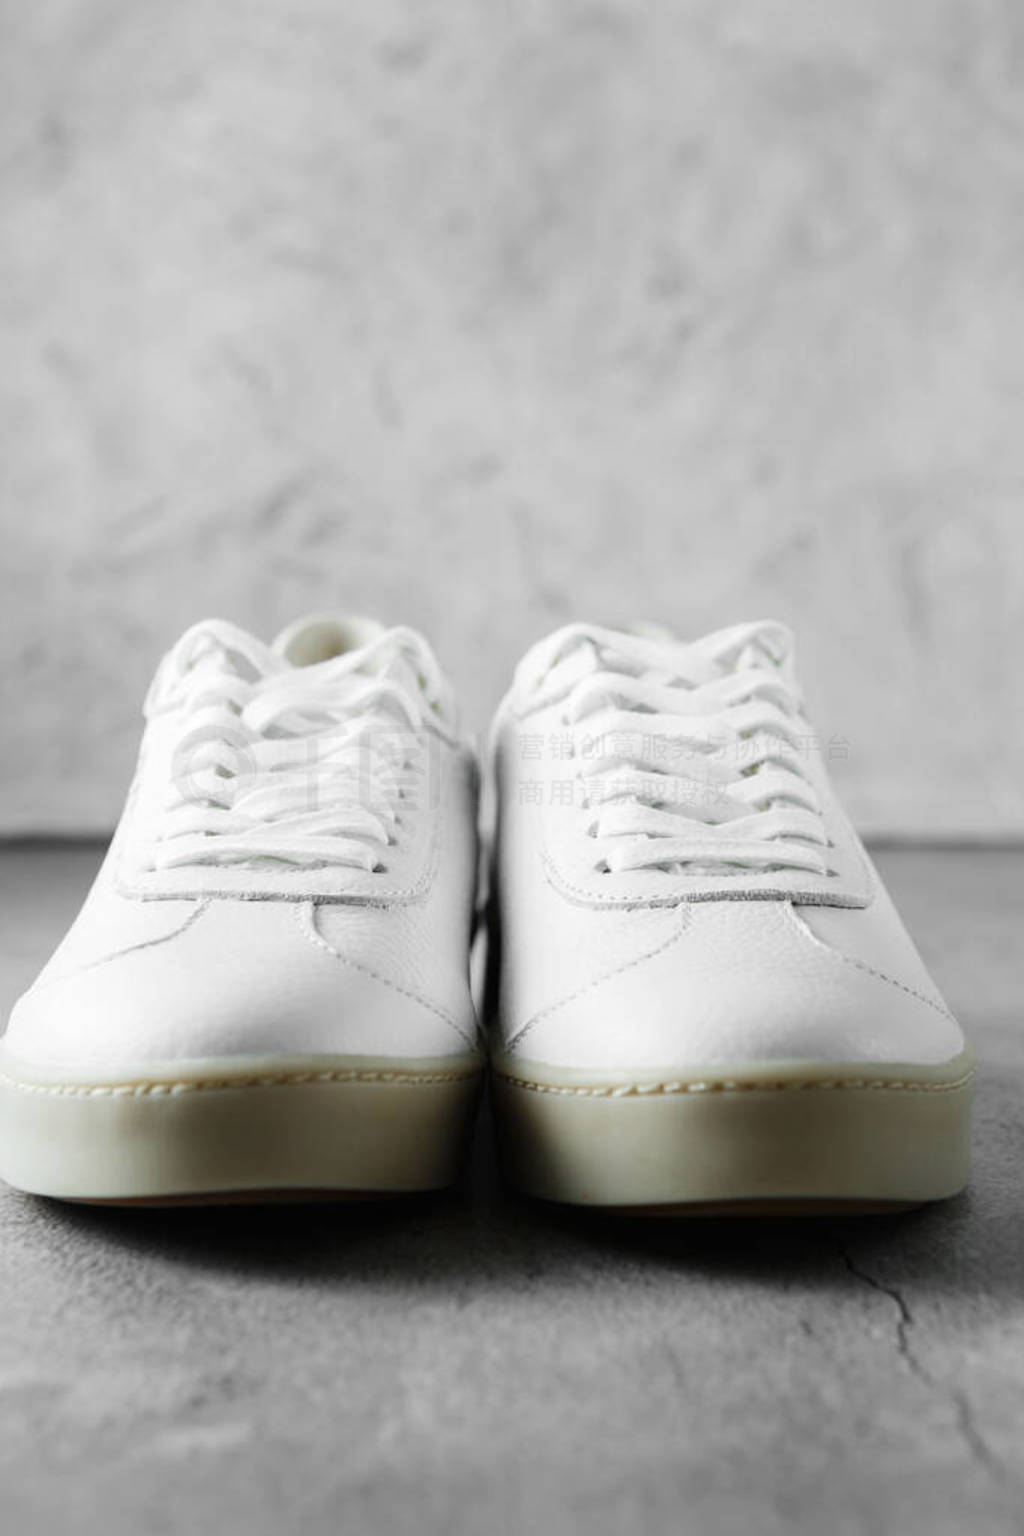 White plimsolls made of tumbled leather, matching laces, fabric